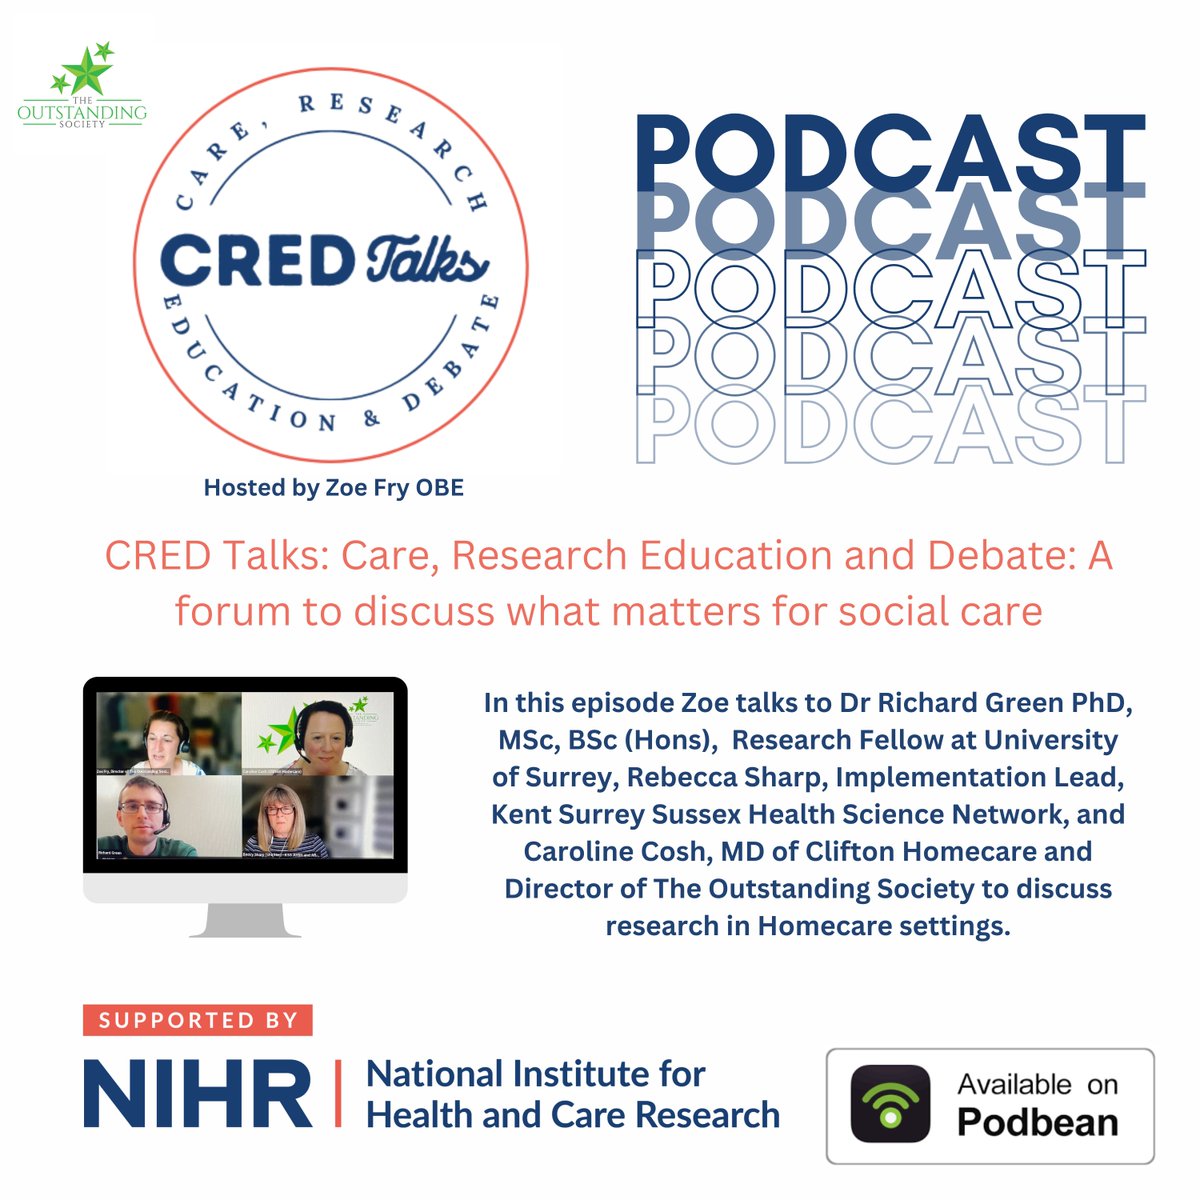 We are delighted to share the second of our CRED Talks Podcast which is supported by @NIHRresearch In this episode we discuss research in Homecare settings. Listen here: buff.ly/3UKbHw4 #research #podcast #socialcare #carehomes @CliftonHomeCare @UniOfSurrey